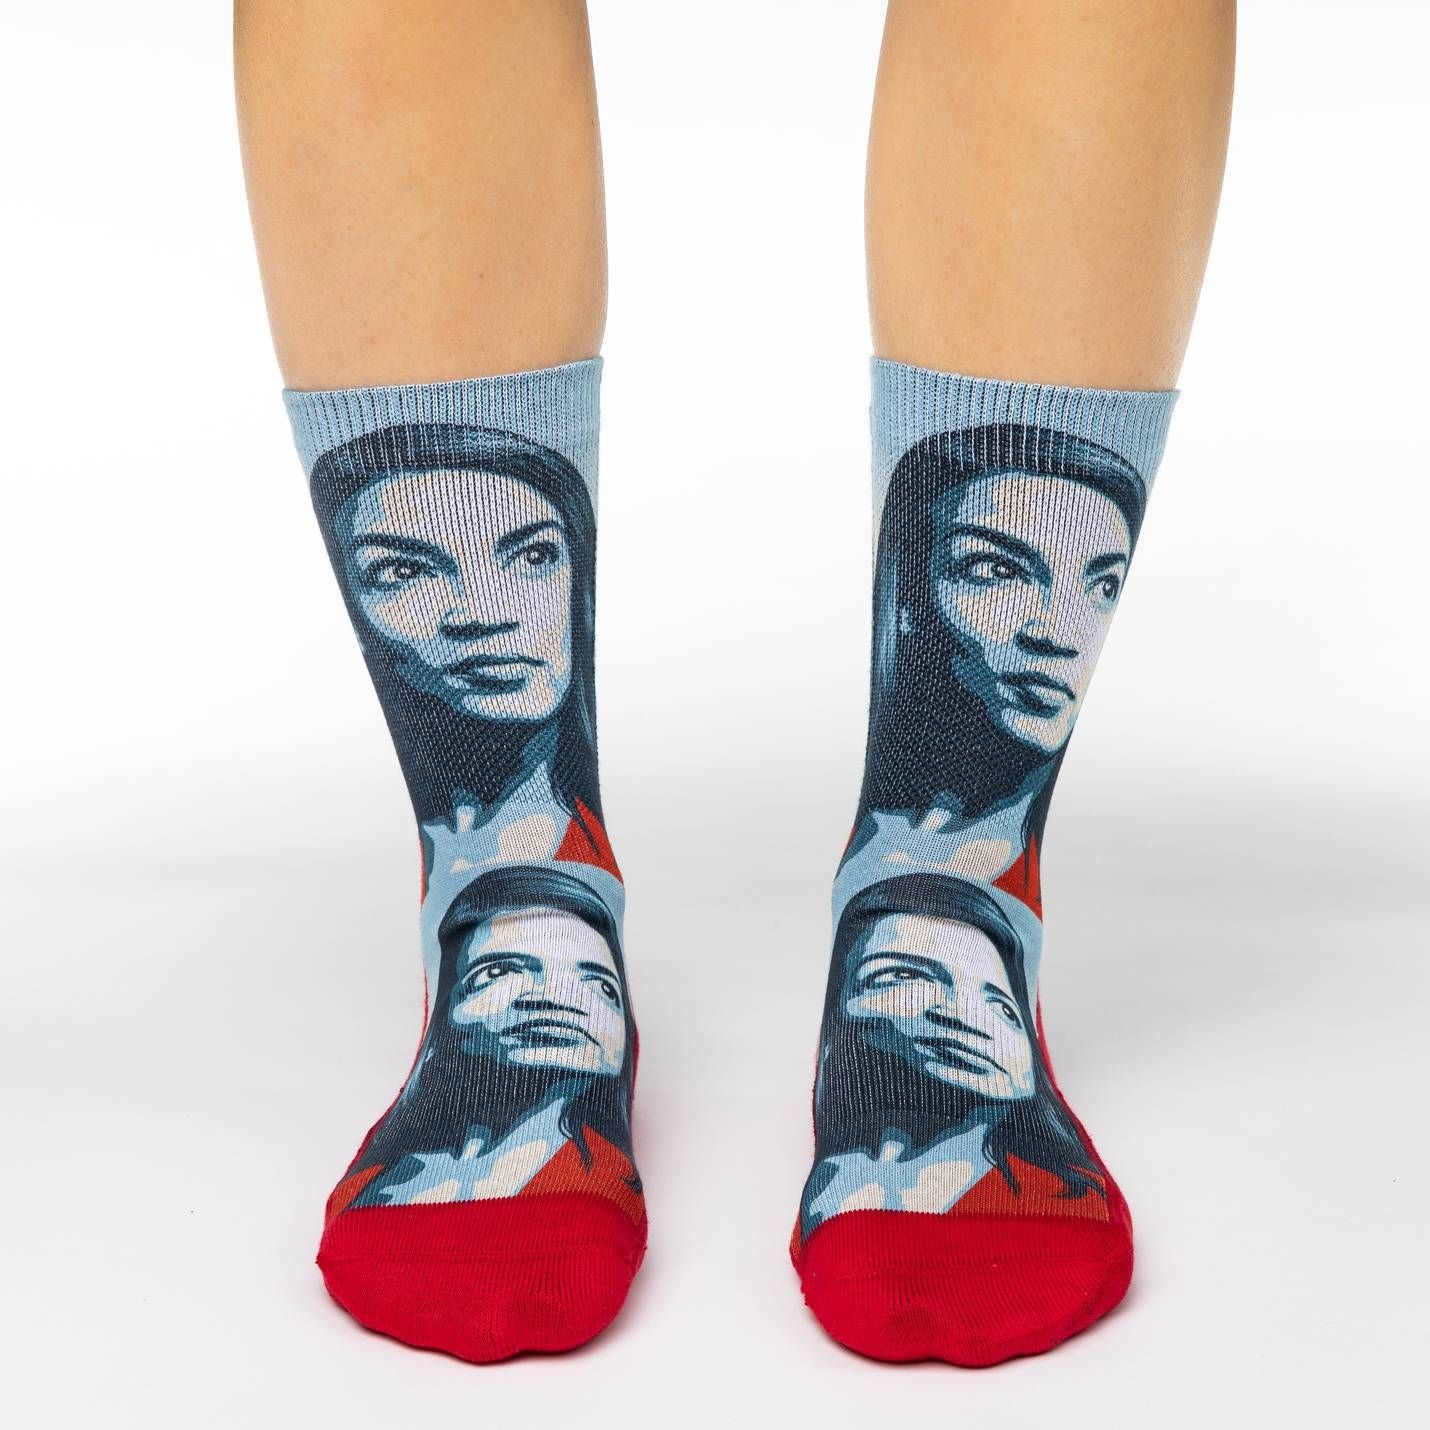 Shown on a foot model, a pair of Good Luck Socks’ polyester-cotton women’s crew socks with portrait of Alexandria Ocasio-Cortez in shades of red, white and blue